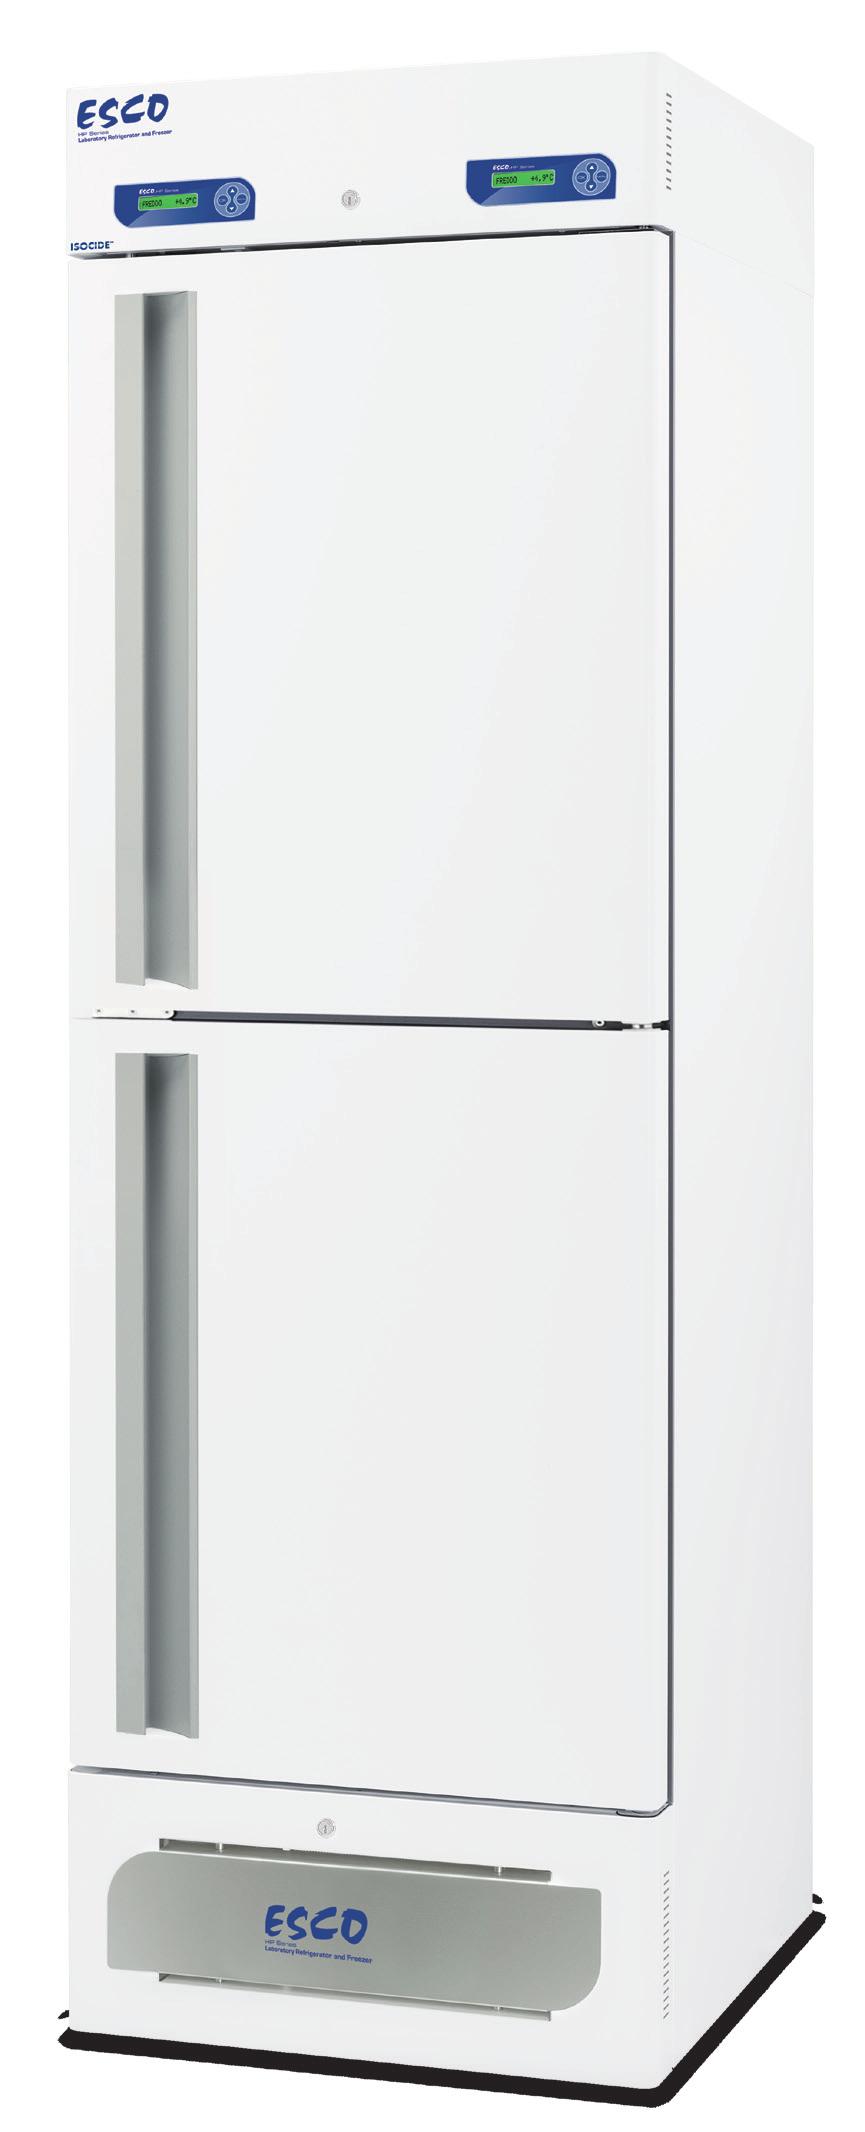 24 Combination Laboratory Refrigerator and Freezer Model: HC6-400S Door Lock Provides additional security for expensive samples and reagents from unauthorized users Displays data about the unit and